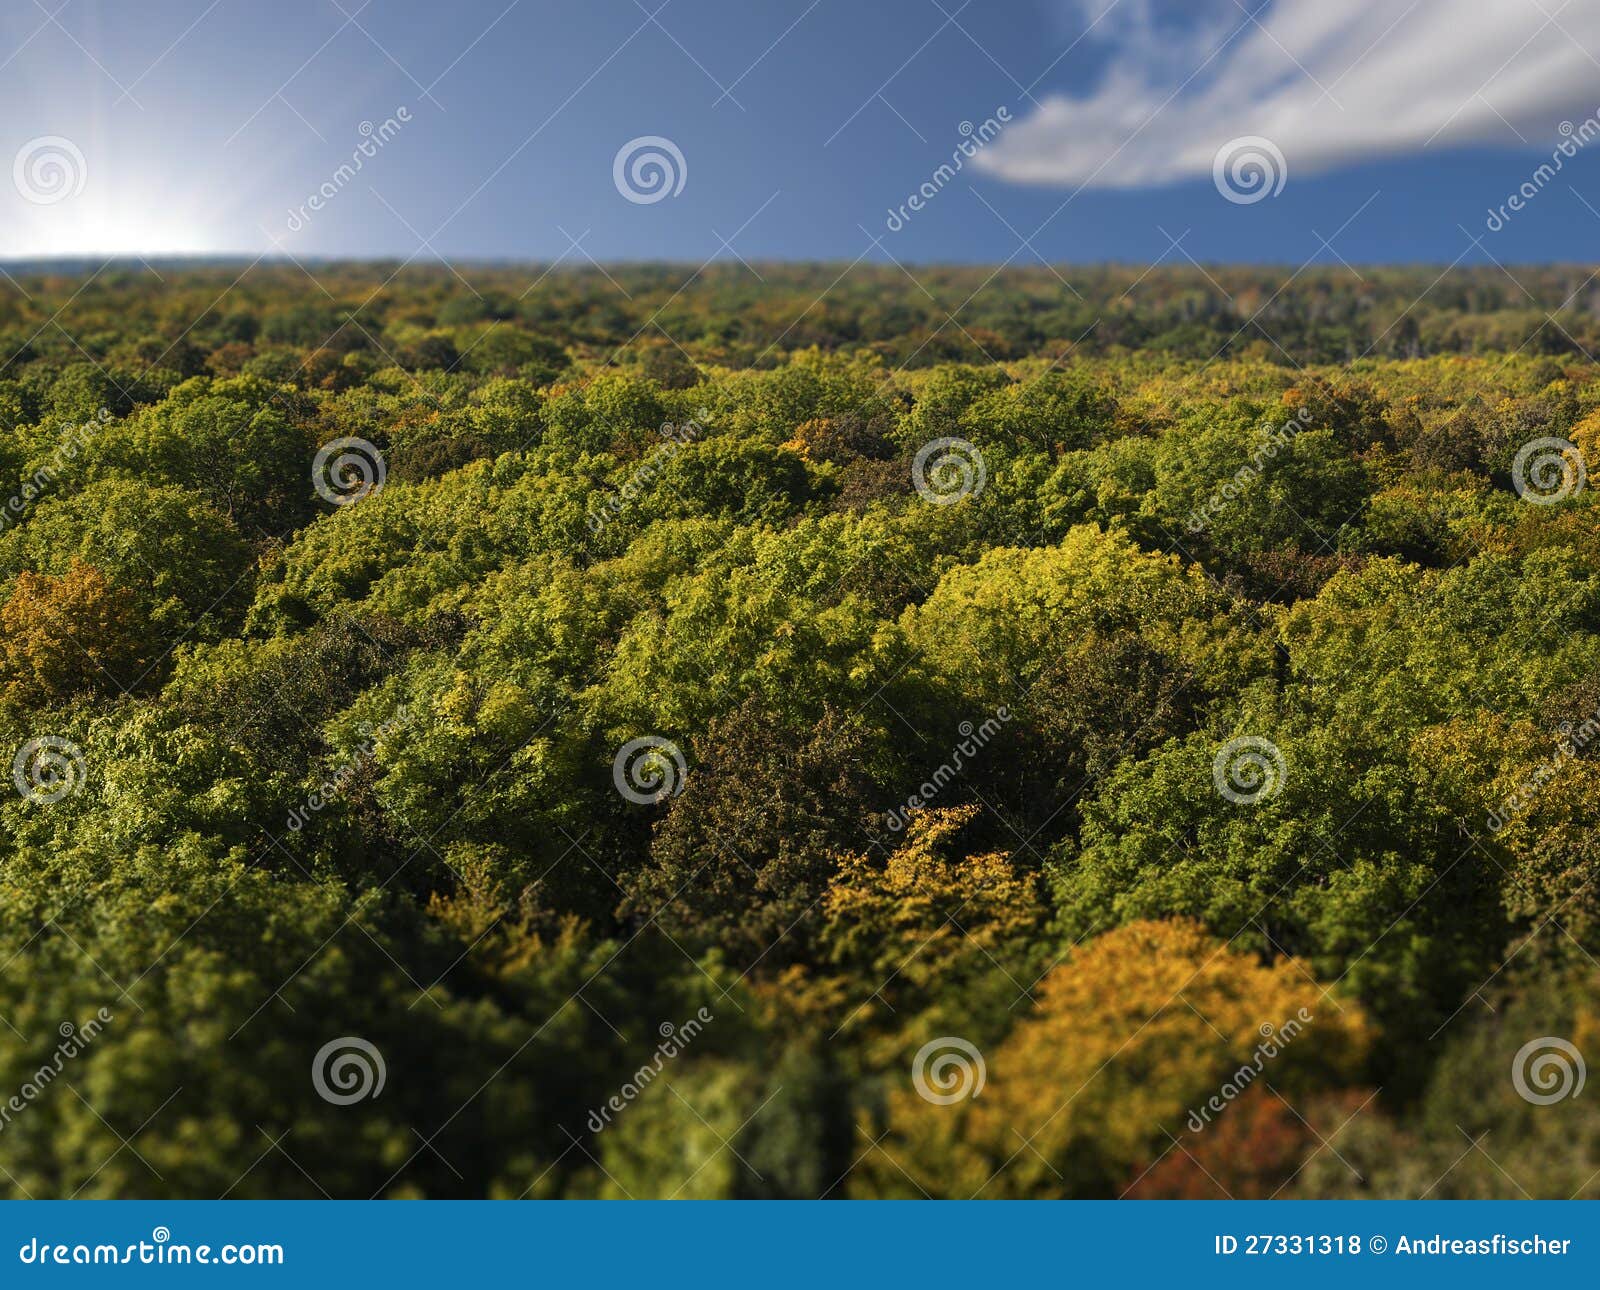 overhead view of dense forest